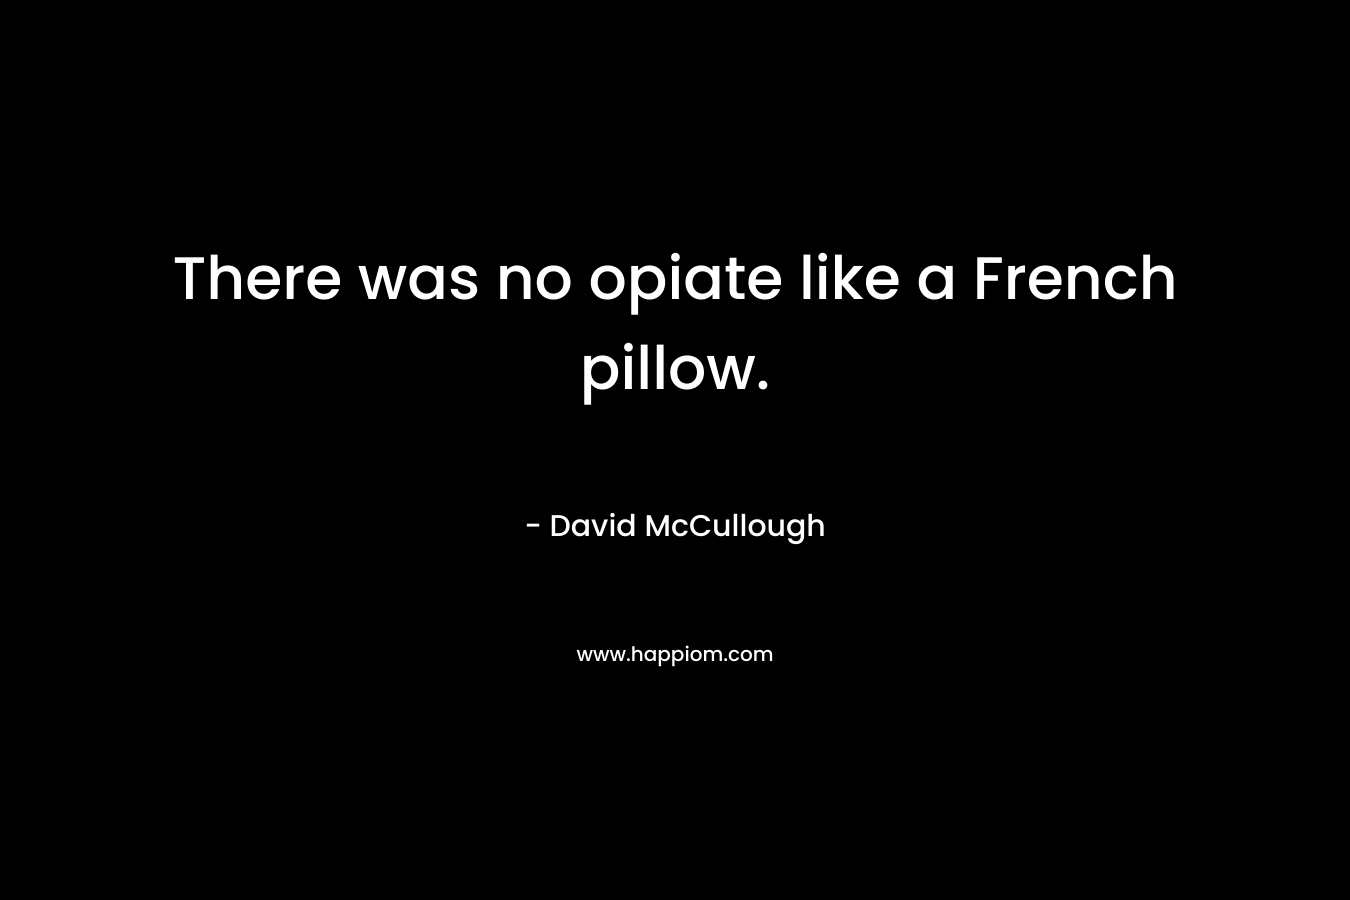 There was no opiate like a French pillow.